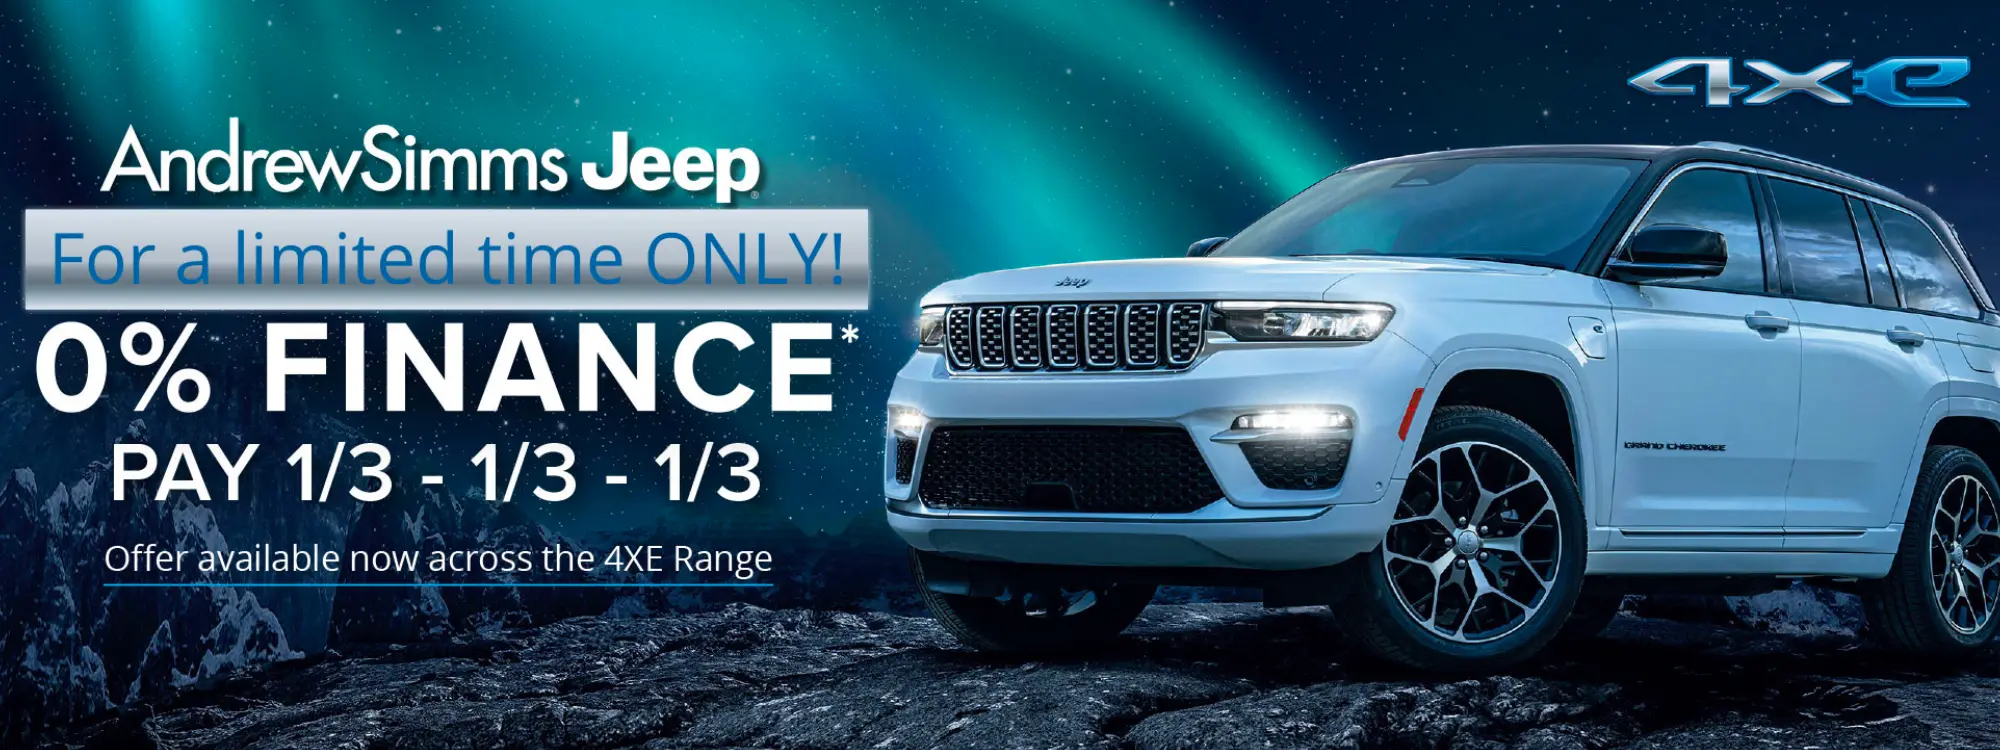 Jeep Offer Hp